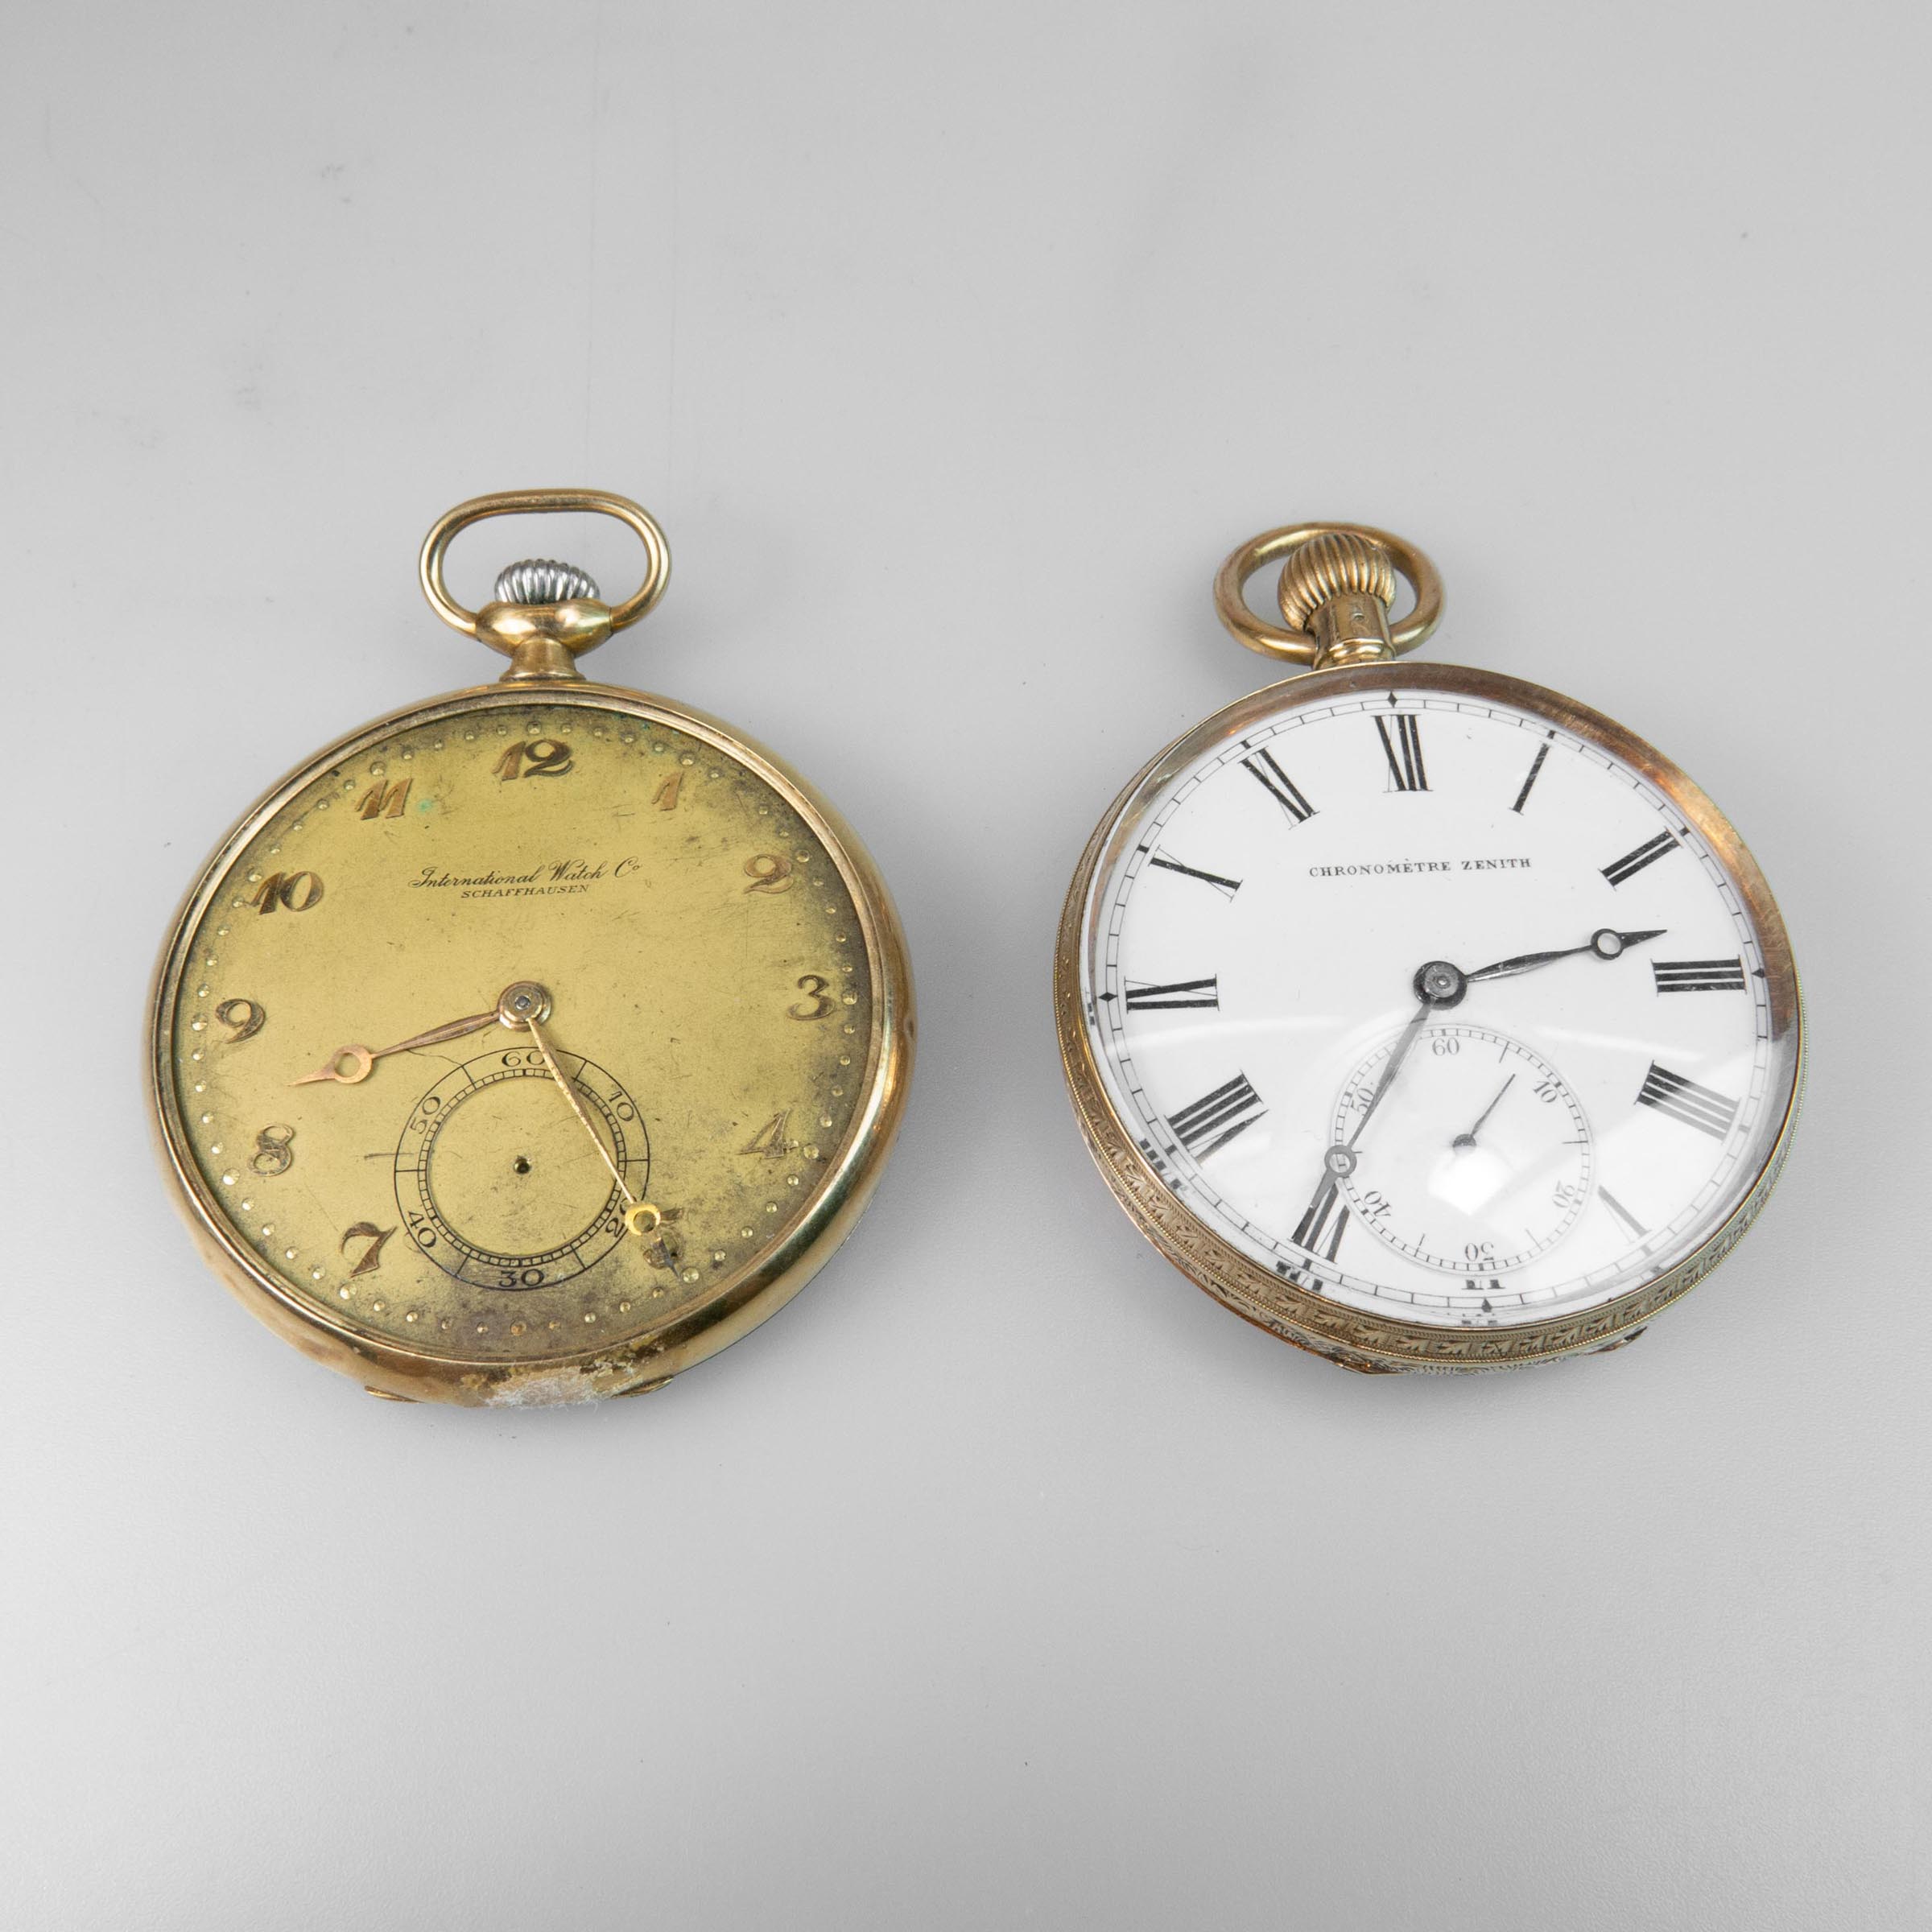 Two Openface Pocket Watches In 14k Yellow Gold Cases